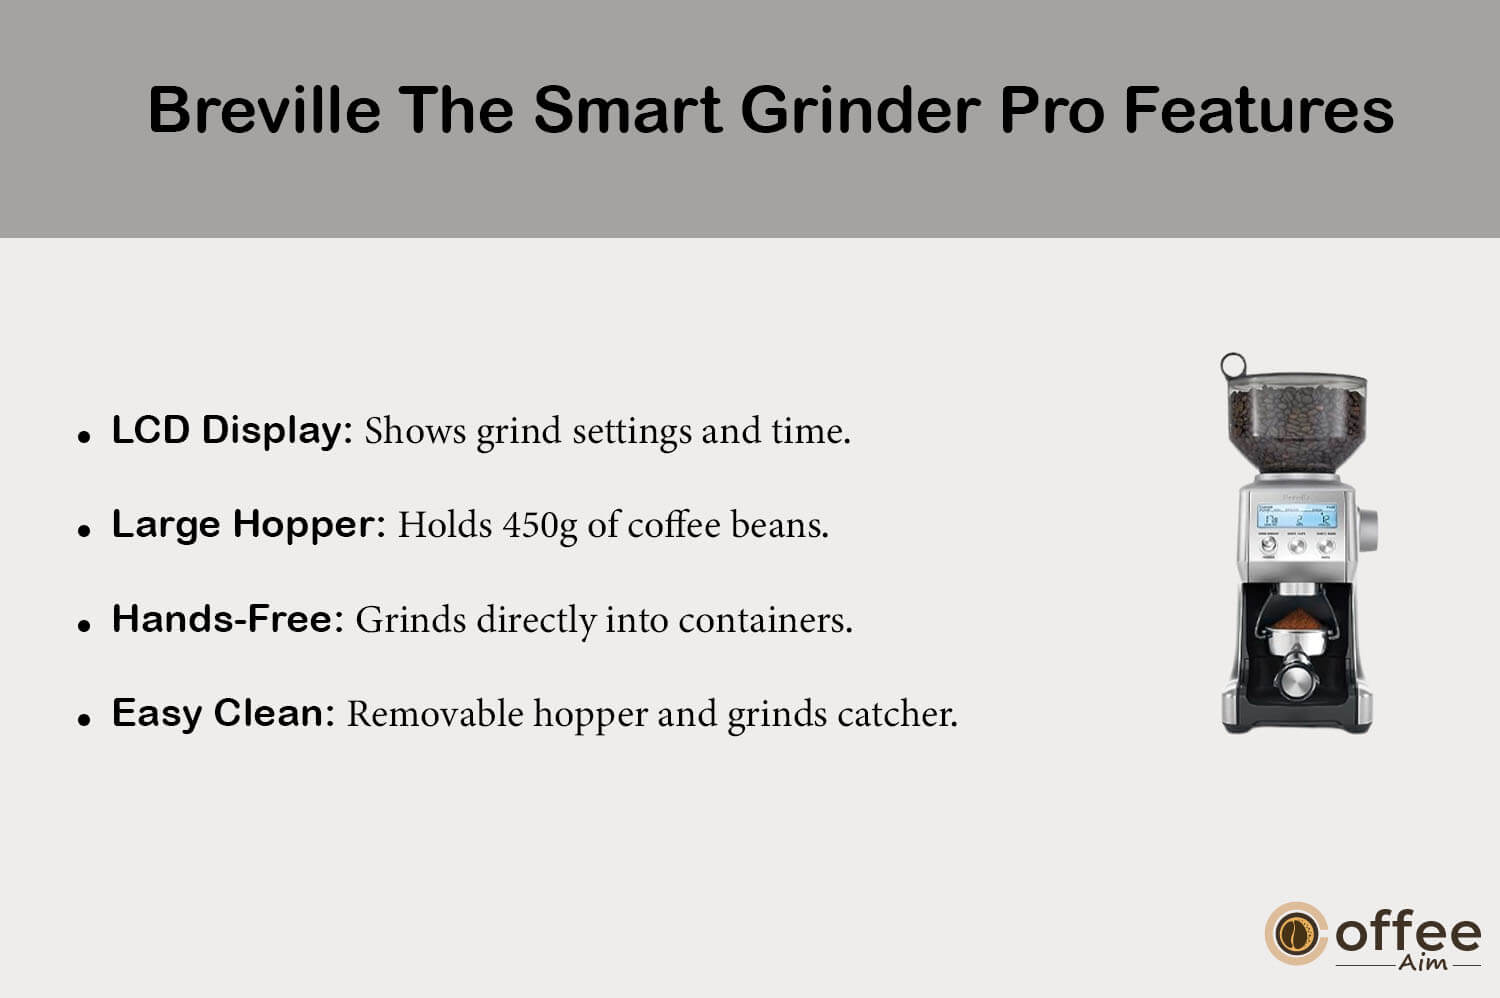 This visual highlights the array of features offered by the Breville The Smart Grinder Pro BCG820BSSXL, providing a comprehensive overview for our detailed review article, "Breville The Smart Grinder Pro BCG820BSSXL Review."